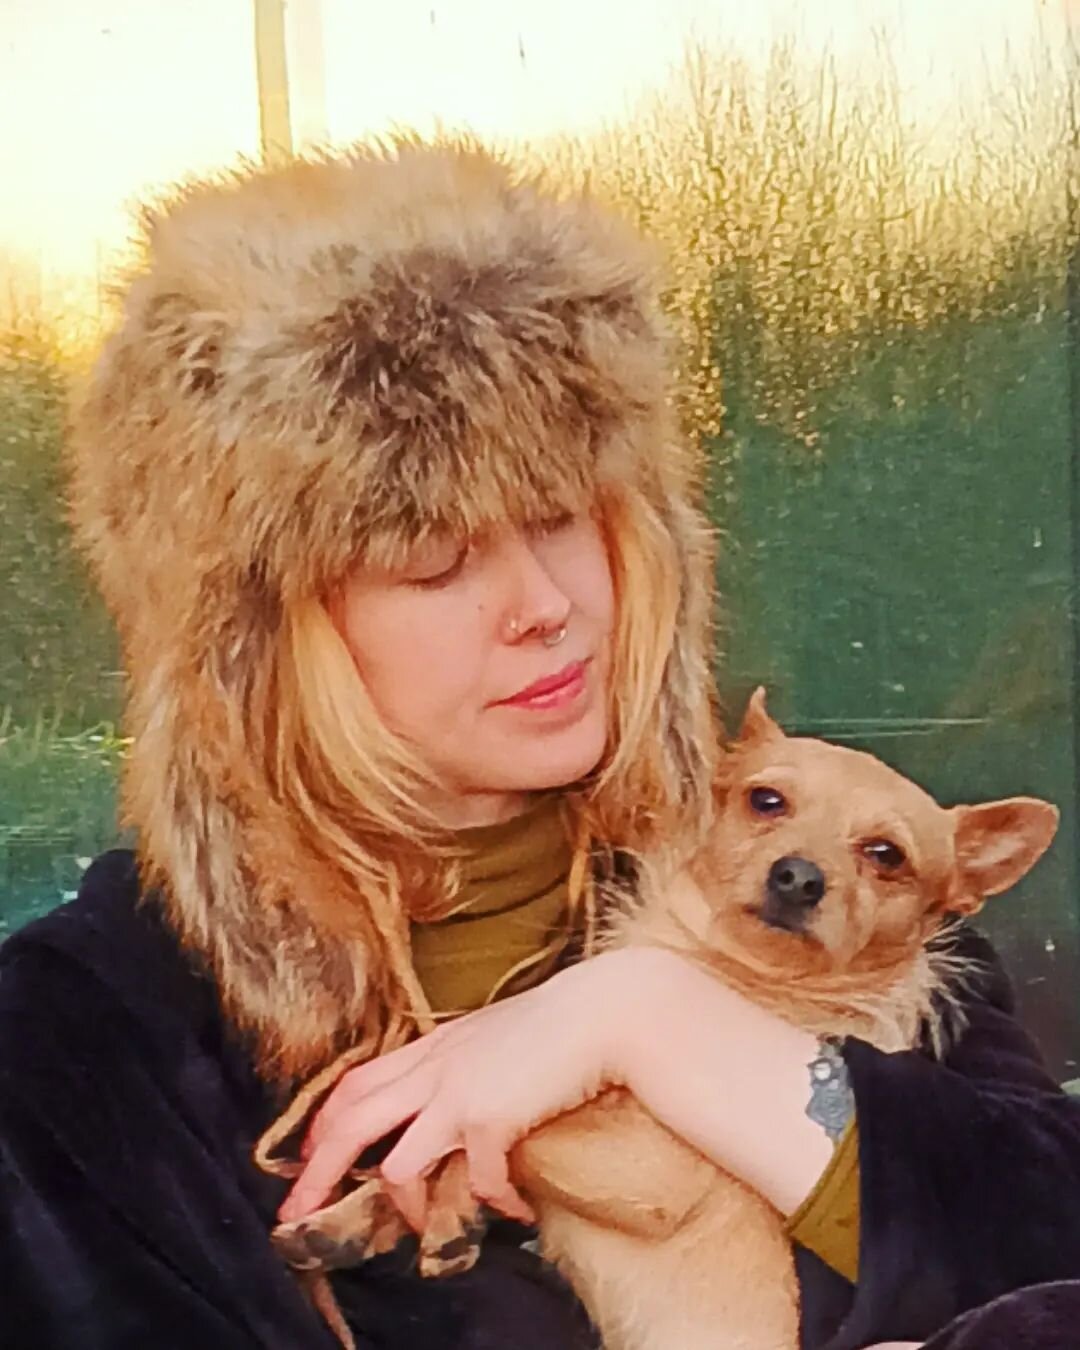 The neighbours hat party back in the winter sun 🌞☀ - that quickly turned into a completion with this hat and matching furr child😉🤡